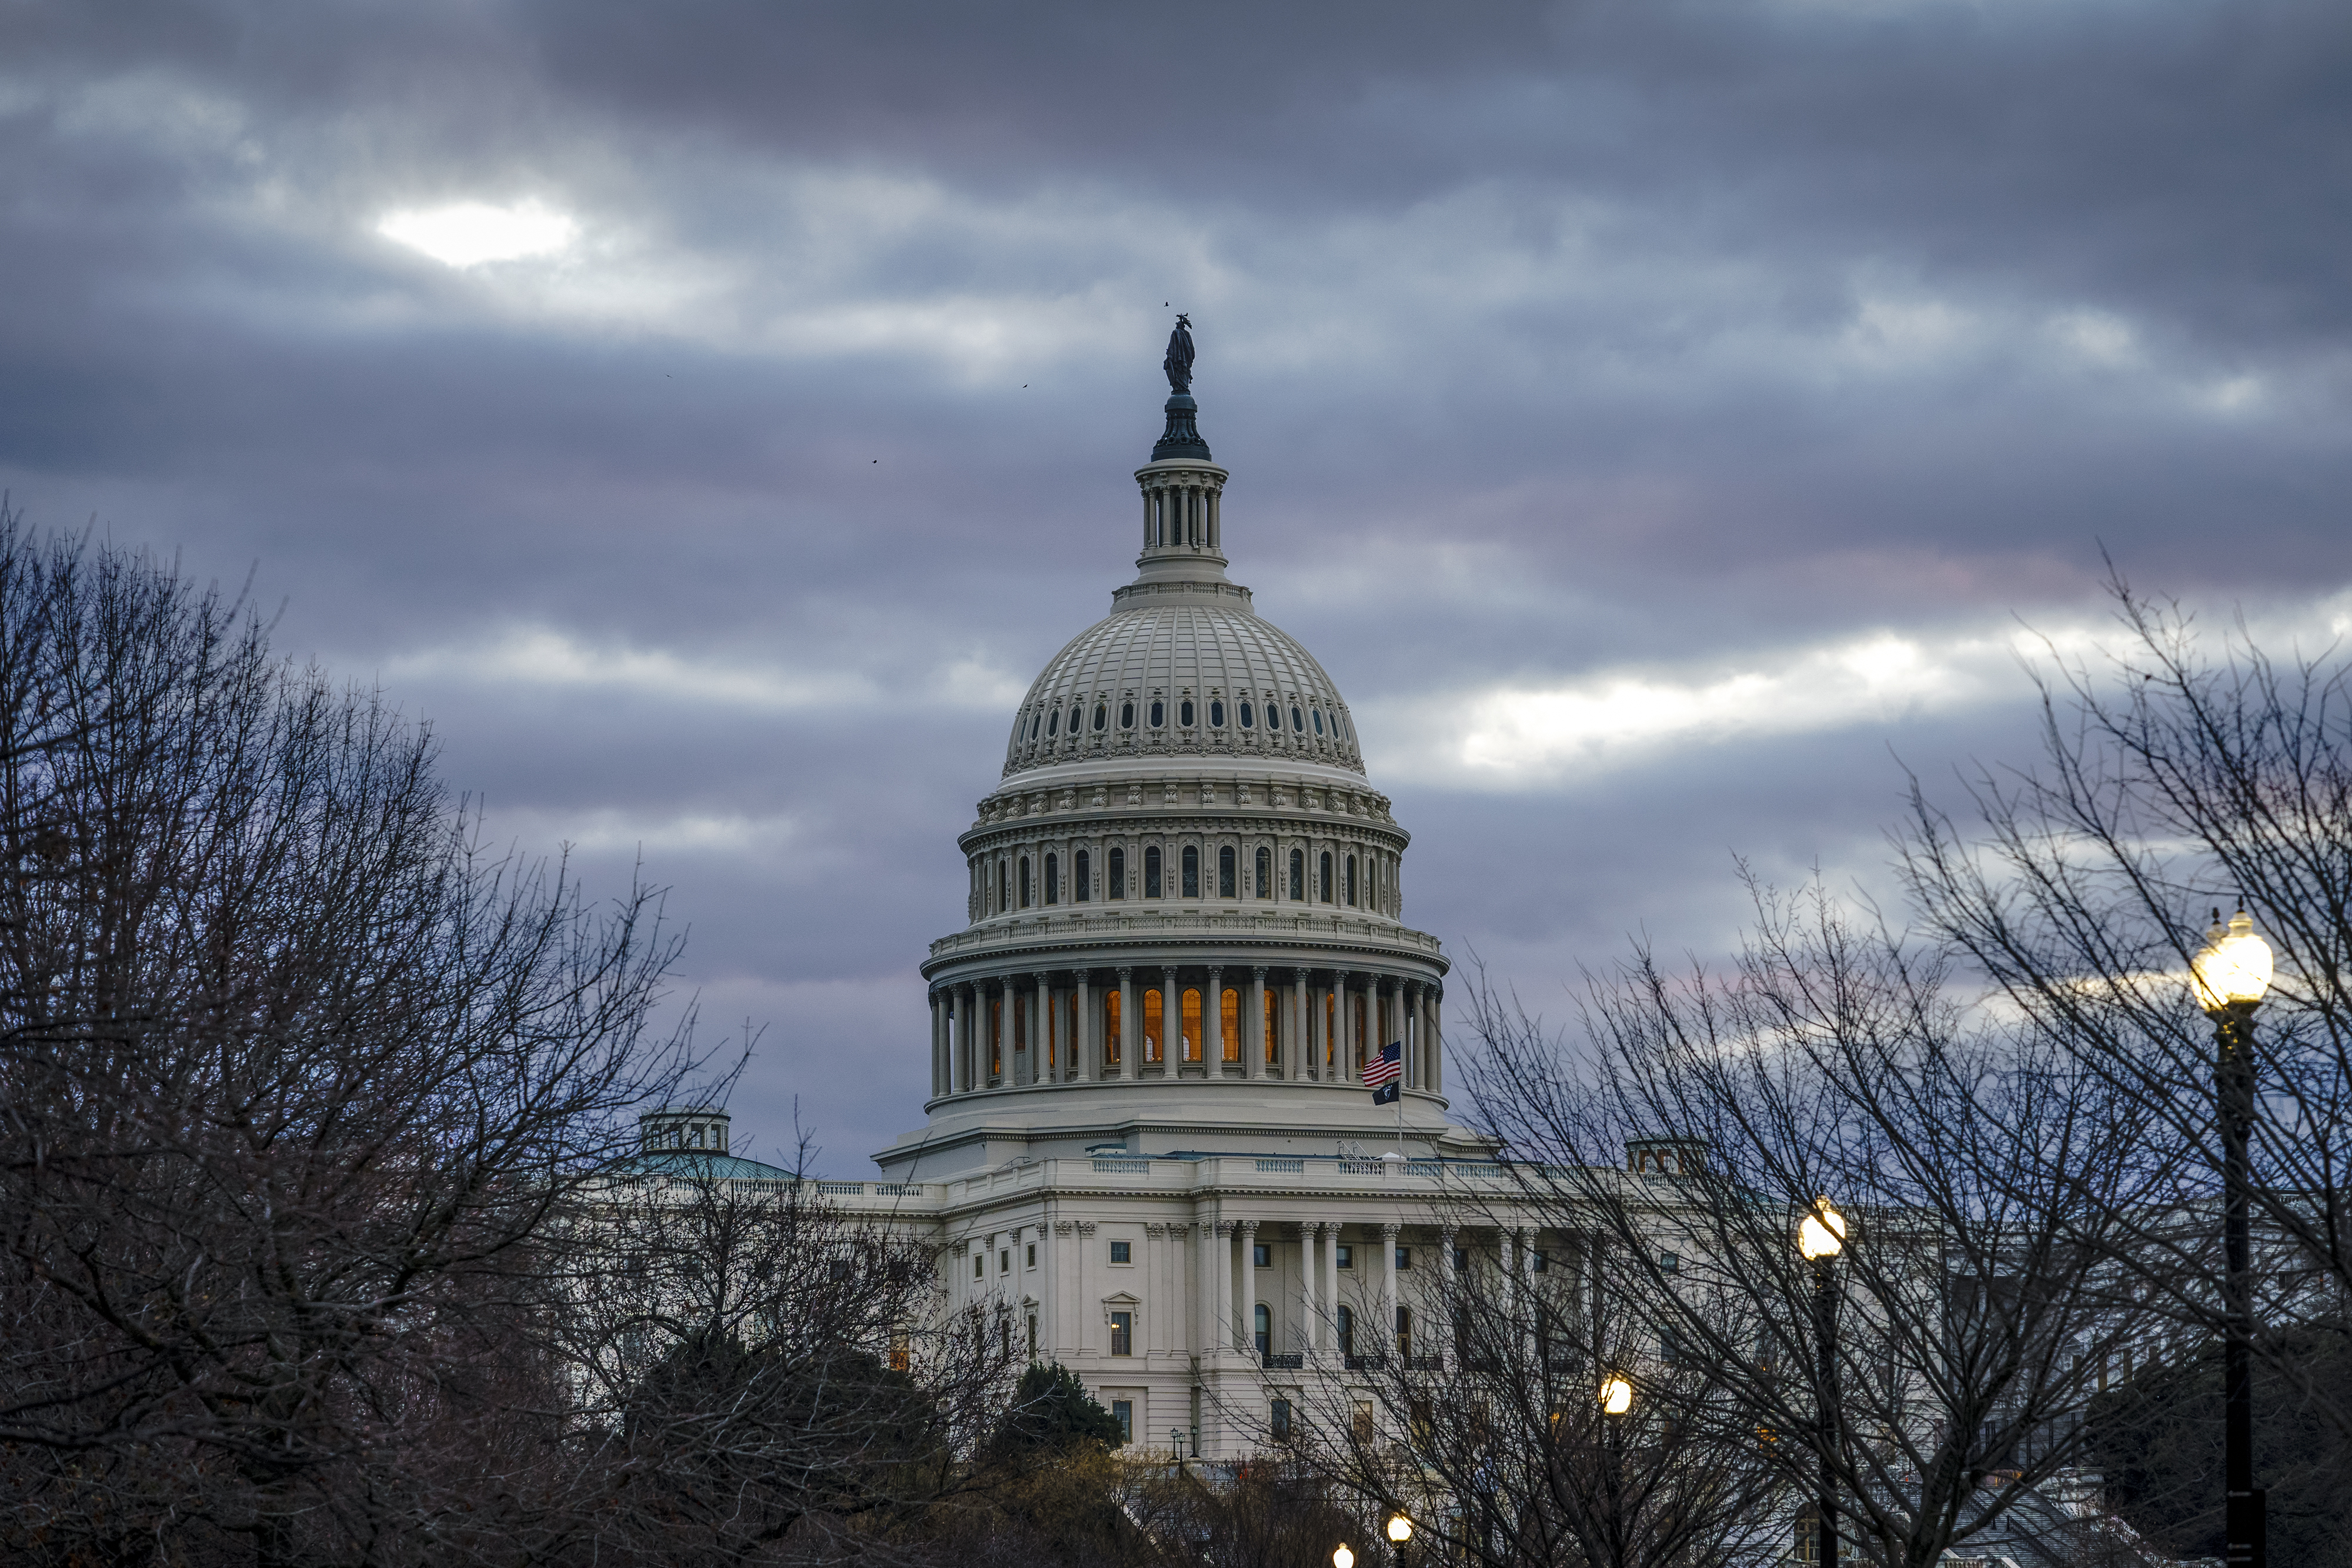 The Capitol is seen in Washington, early Monday, Jan. 6, 2020, as Congress returns to Washington to face the challenge of fallout from President Donald Trump's military strike in Iraq that killed Iranian official, Gen. Qassem Soleimani. (AP Photo/J. Scott Applewhite)